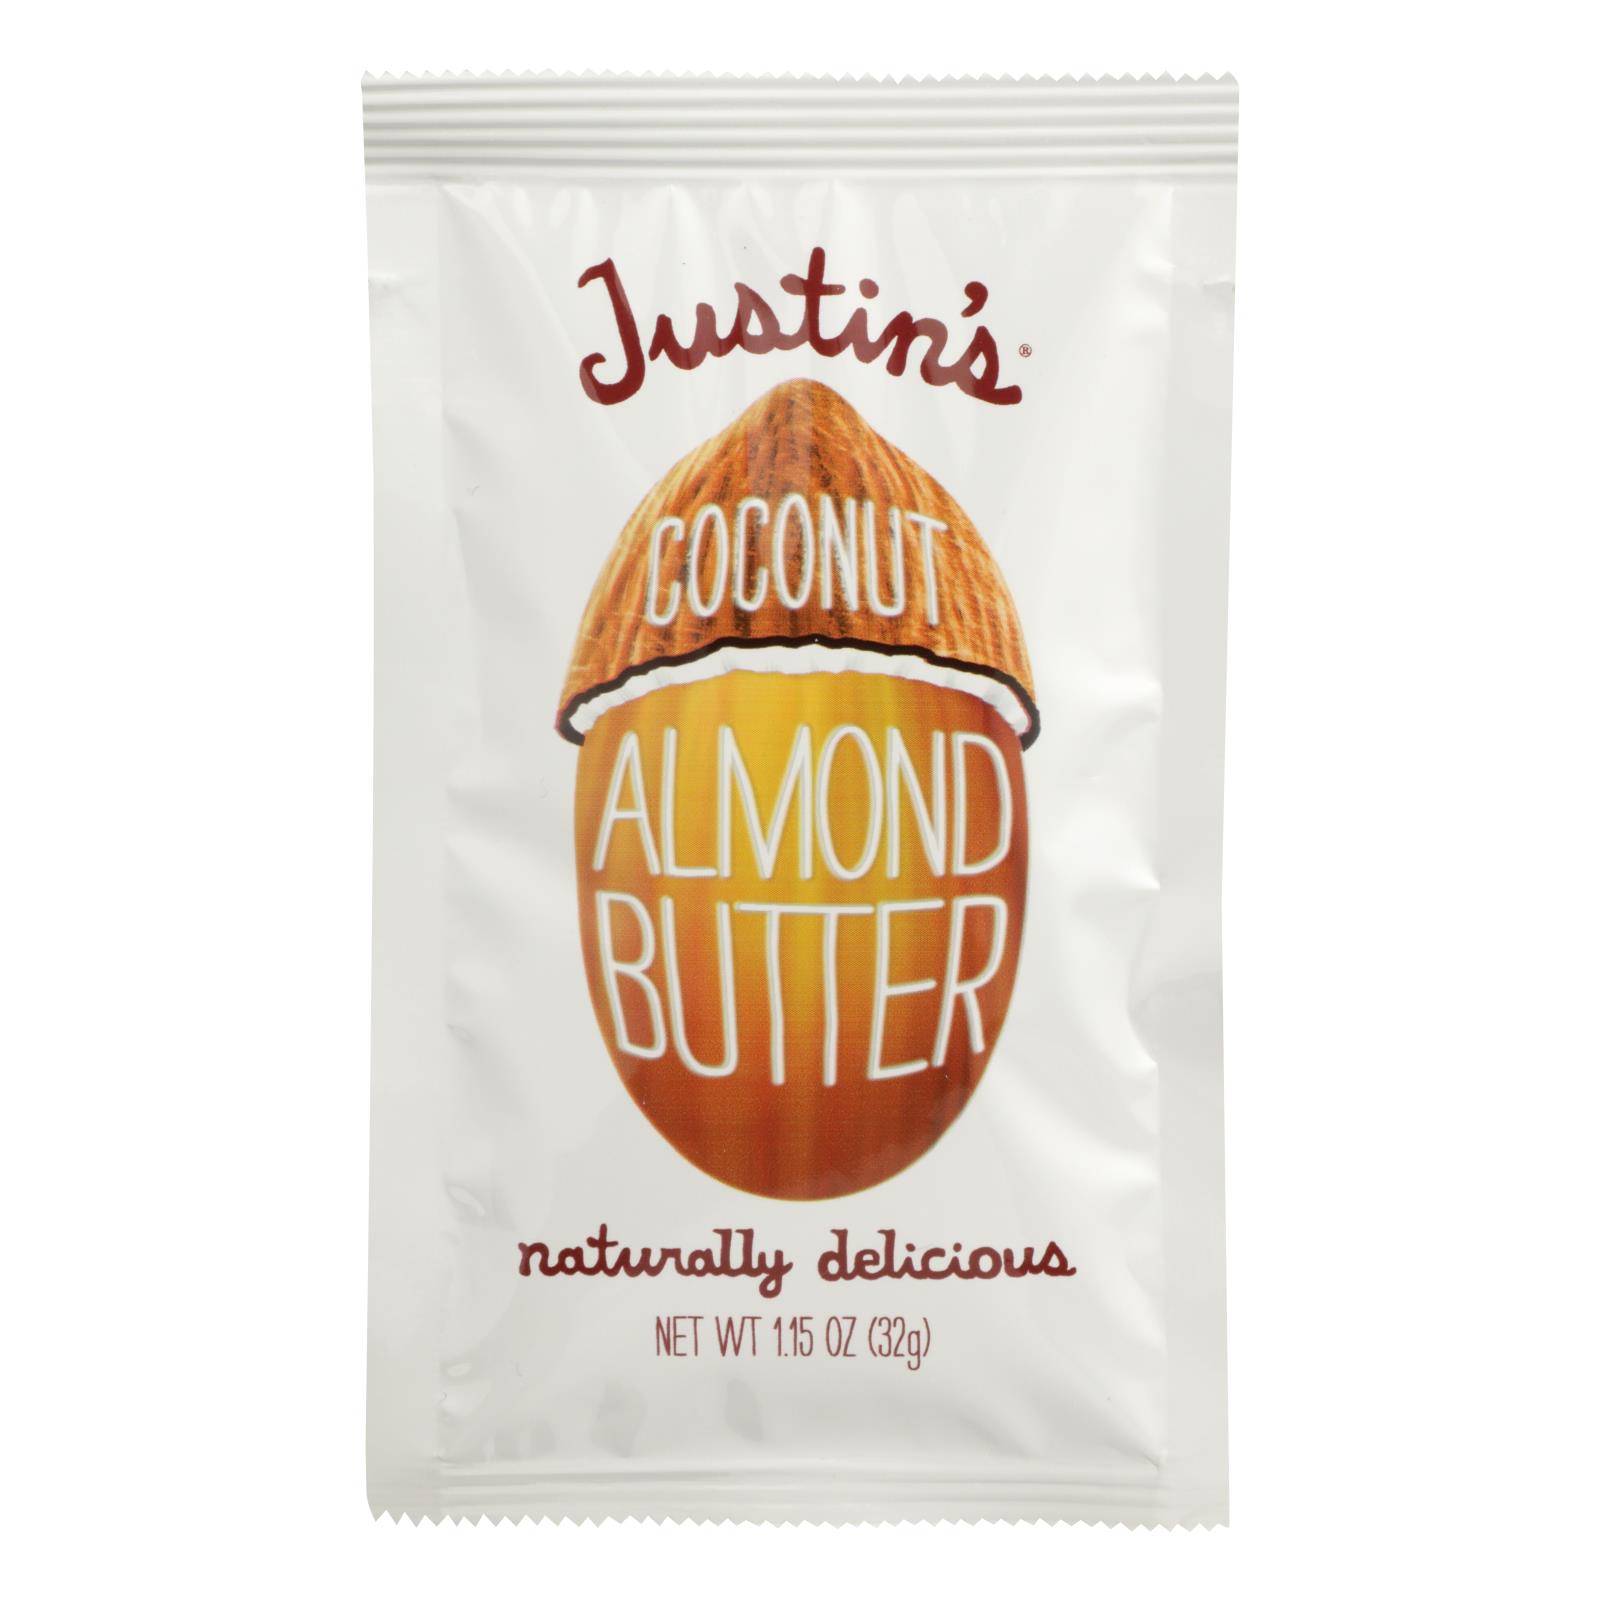 Justin's Nut Butter - Almond Butter Coconut Squeeze - 10개 묶음상품 - 1.15 OZ